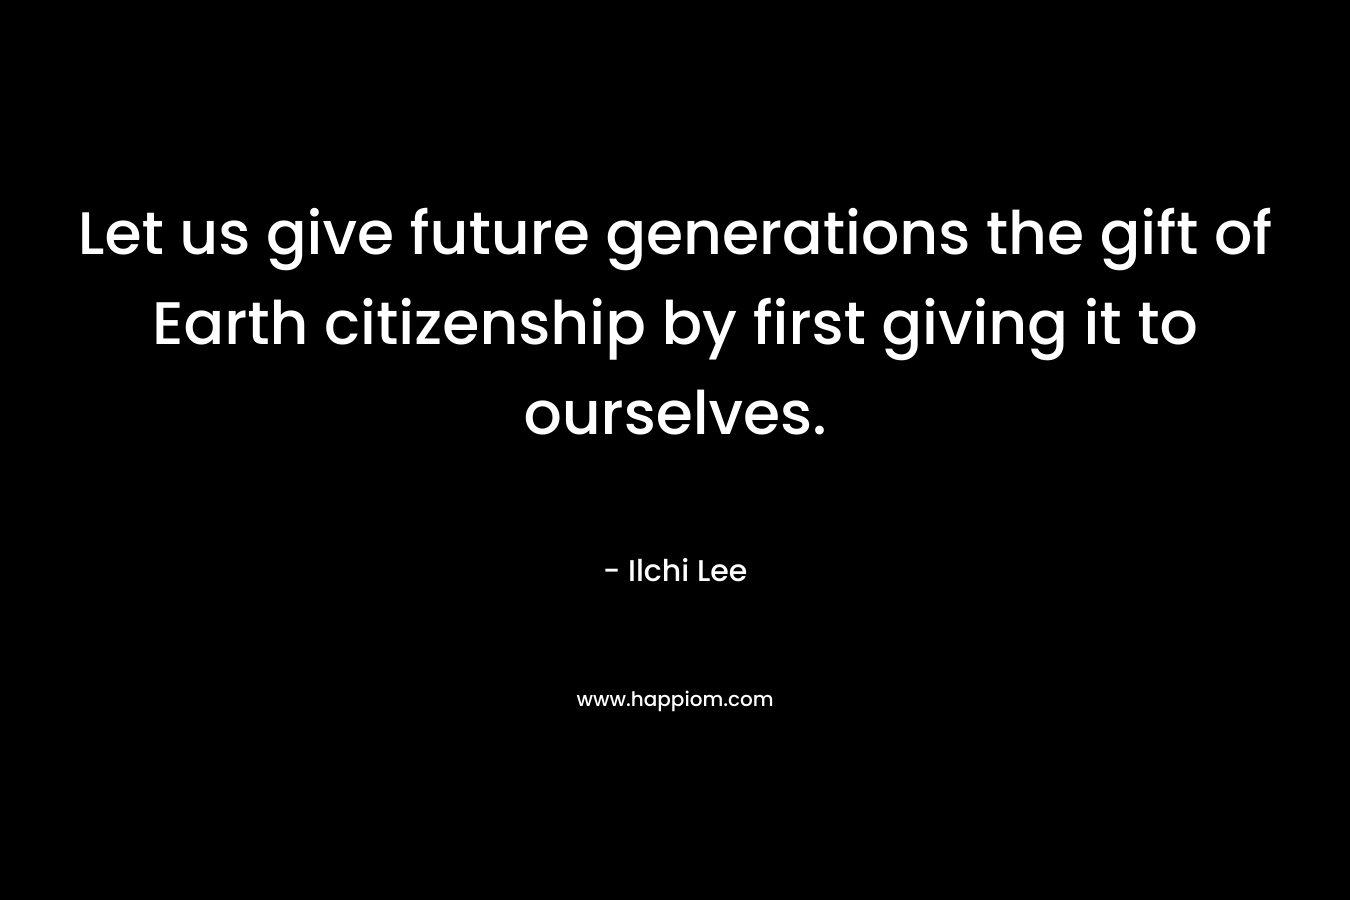 Let us give future generations the gift of Earth citizenship by first giving it to ourselves. – Ilchi Lee